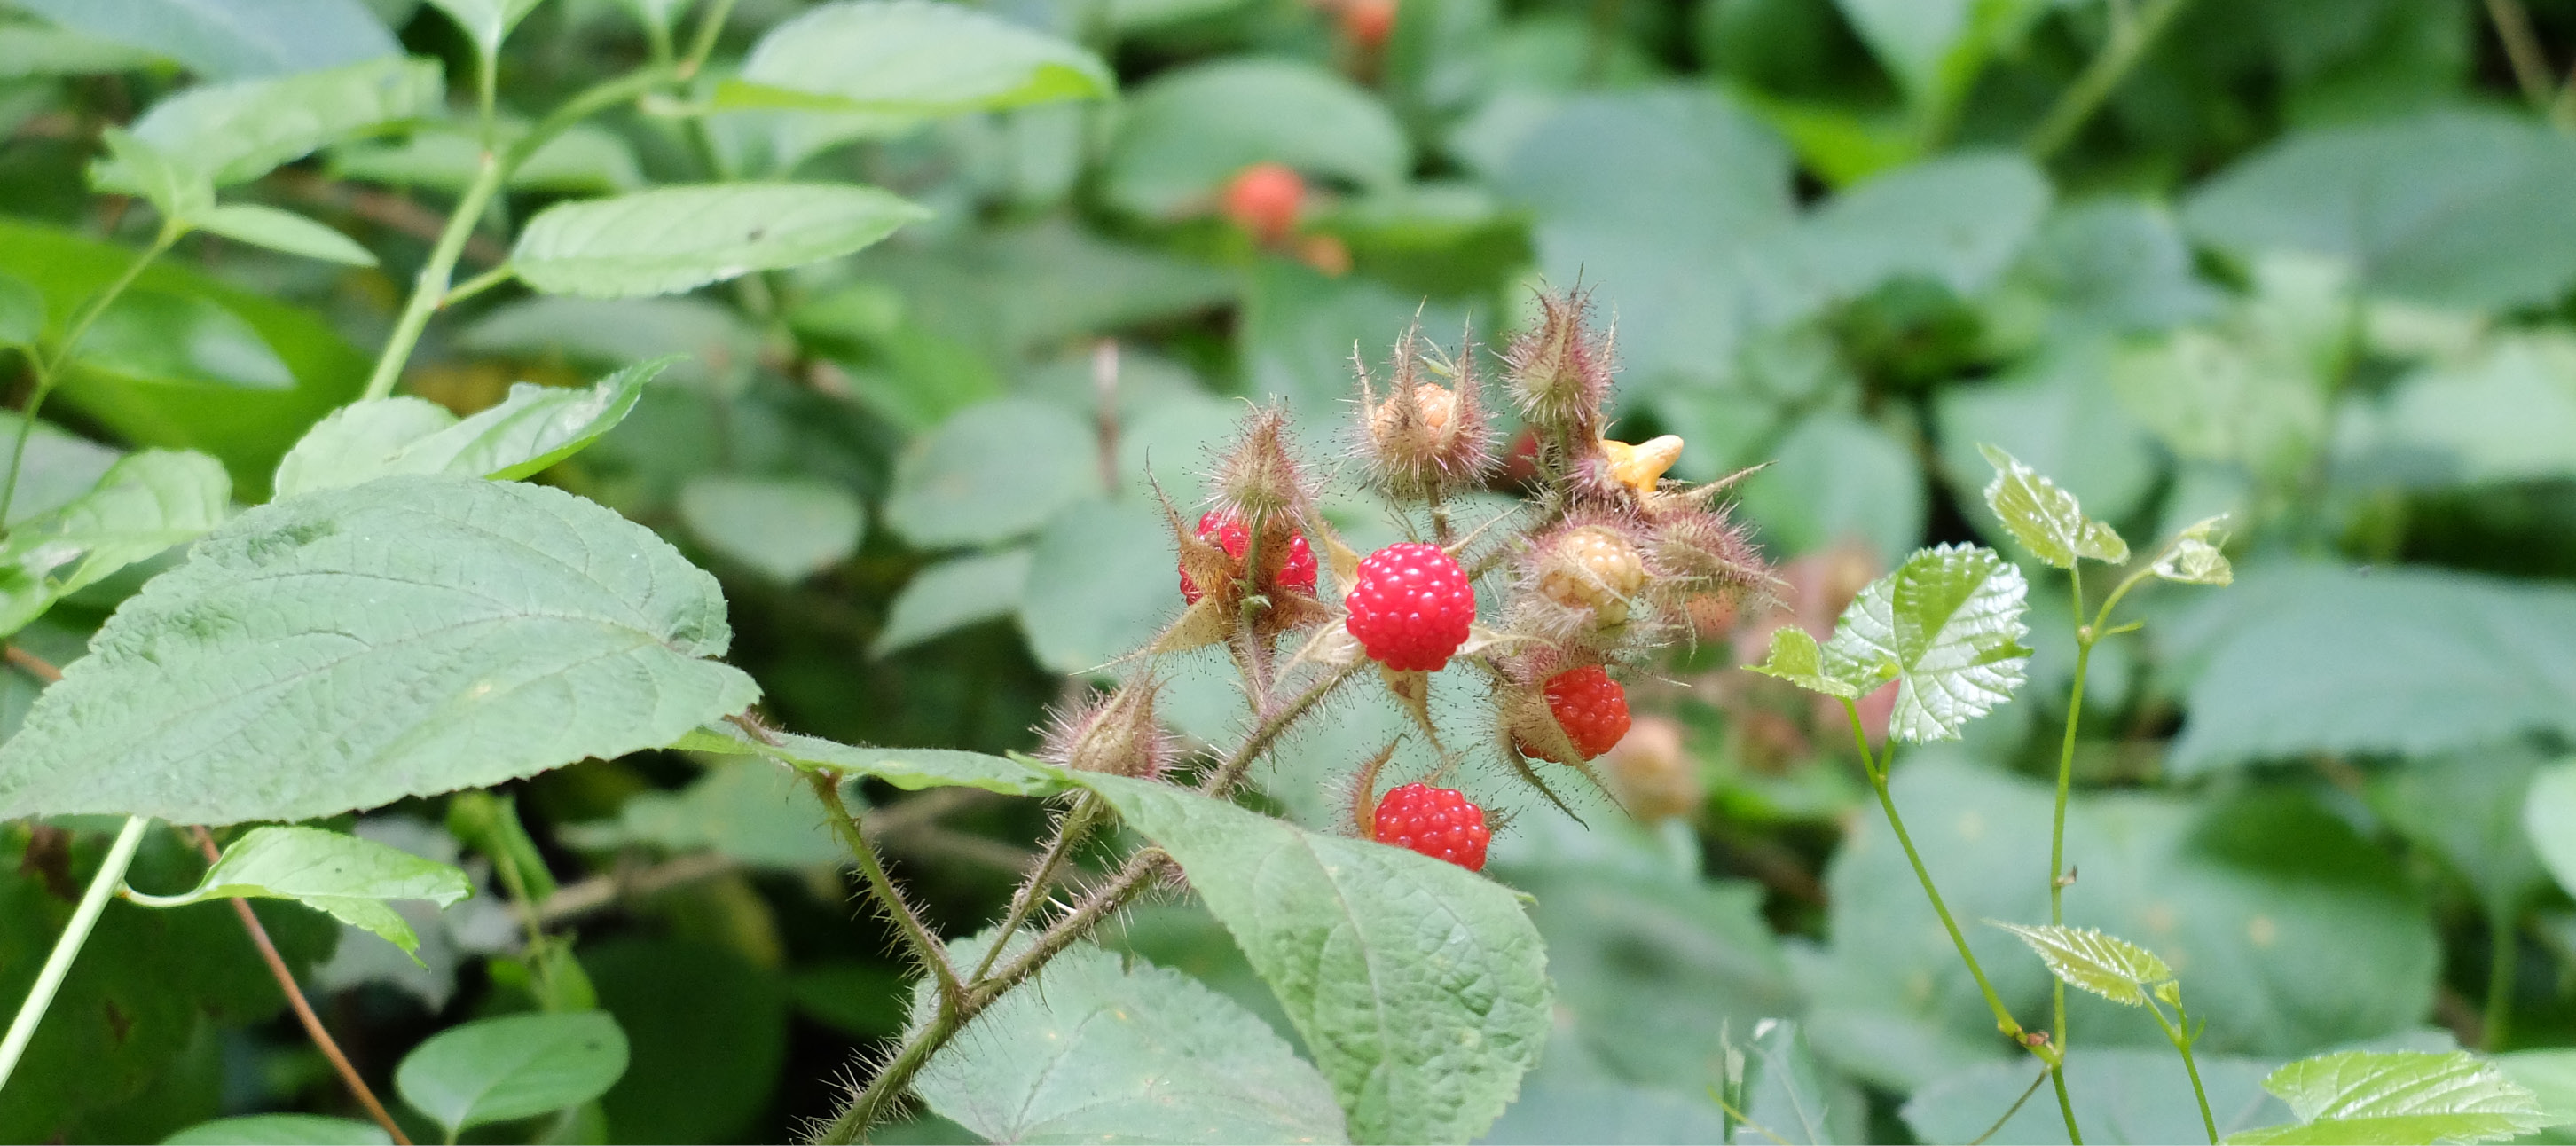 Red wineberries growing among green leaves.